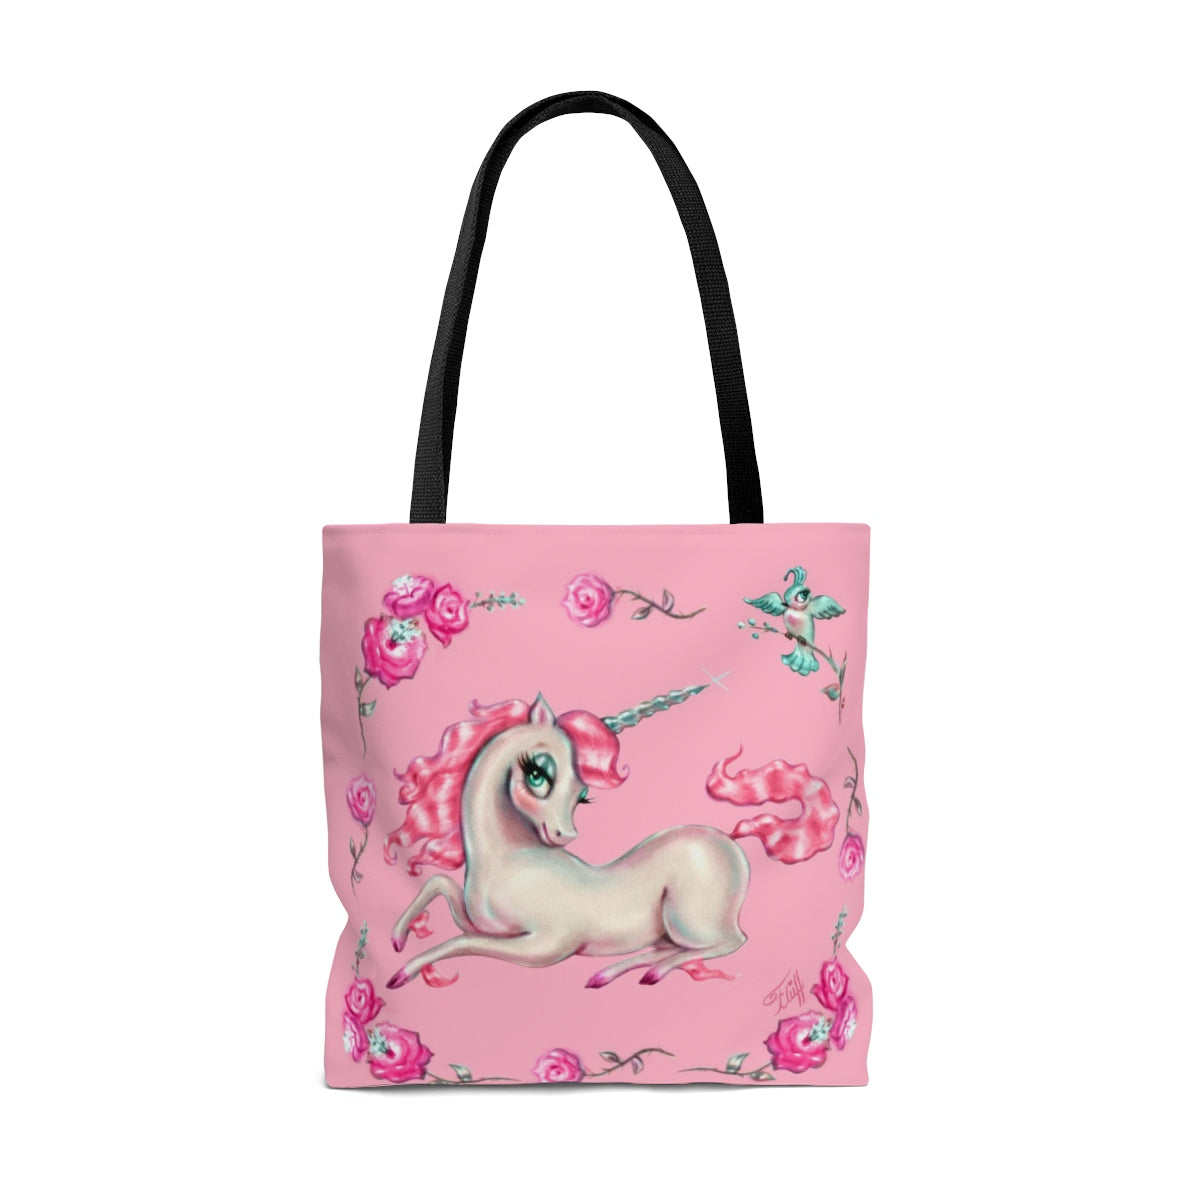 Unicorns and Roses on Pink • Tote Bag